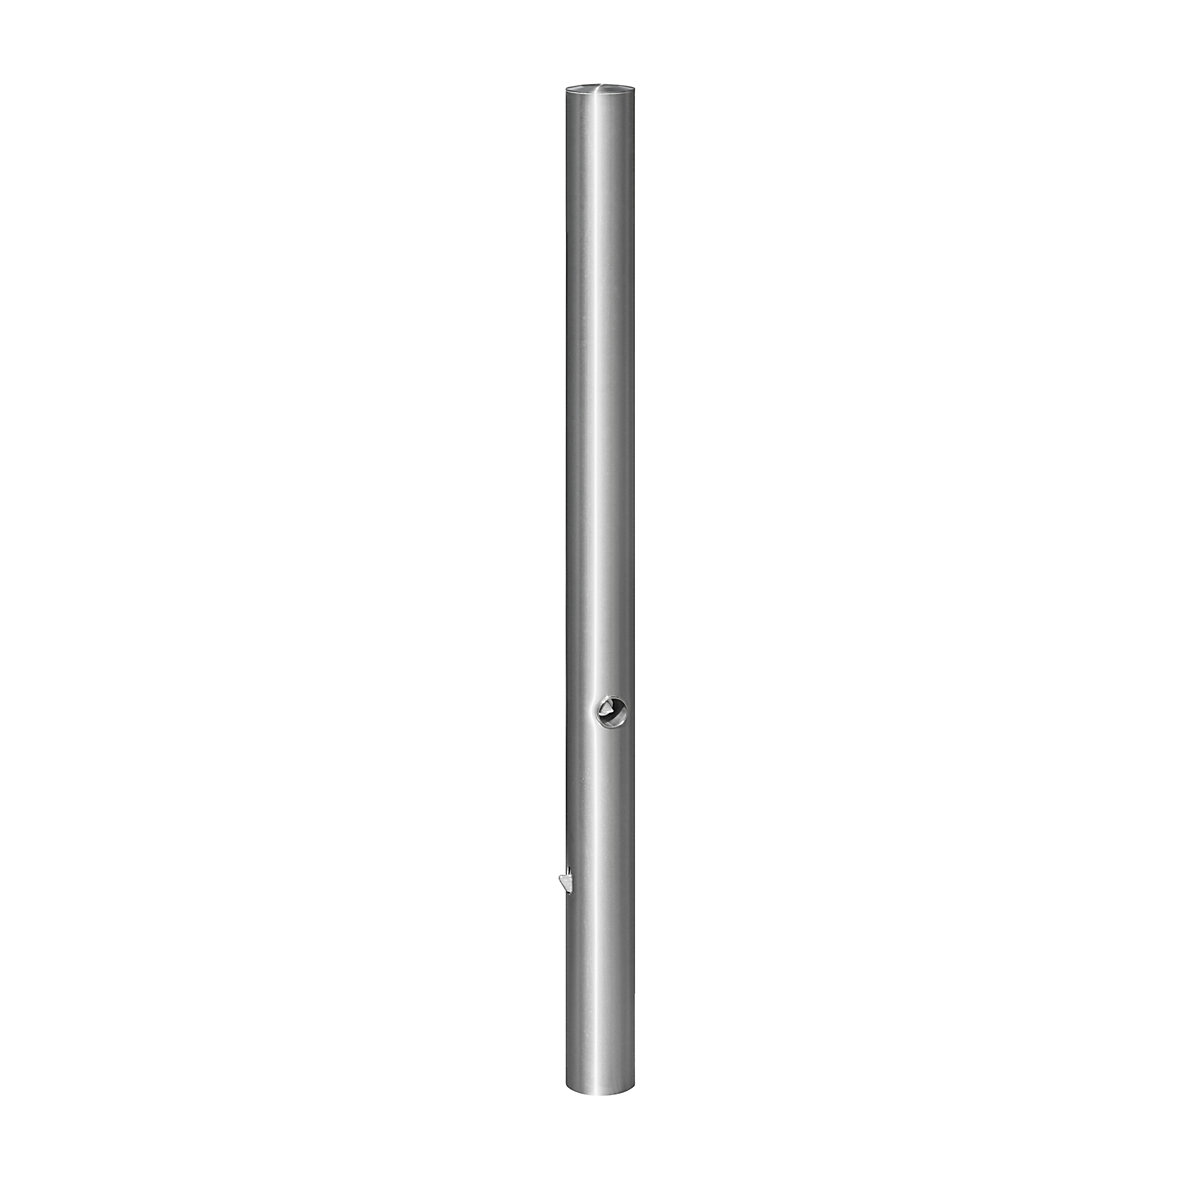 Stainless steel barrier post, with flat head, ground sleeve for concreting in, Ø 76 mm, triangular lock-4